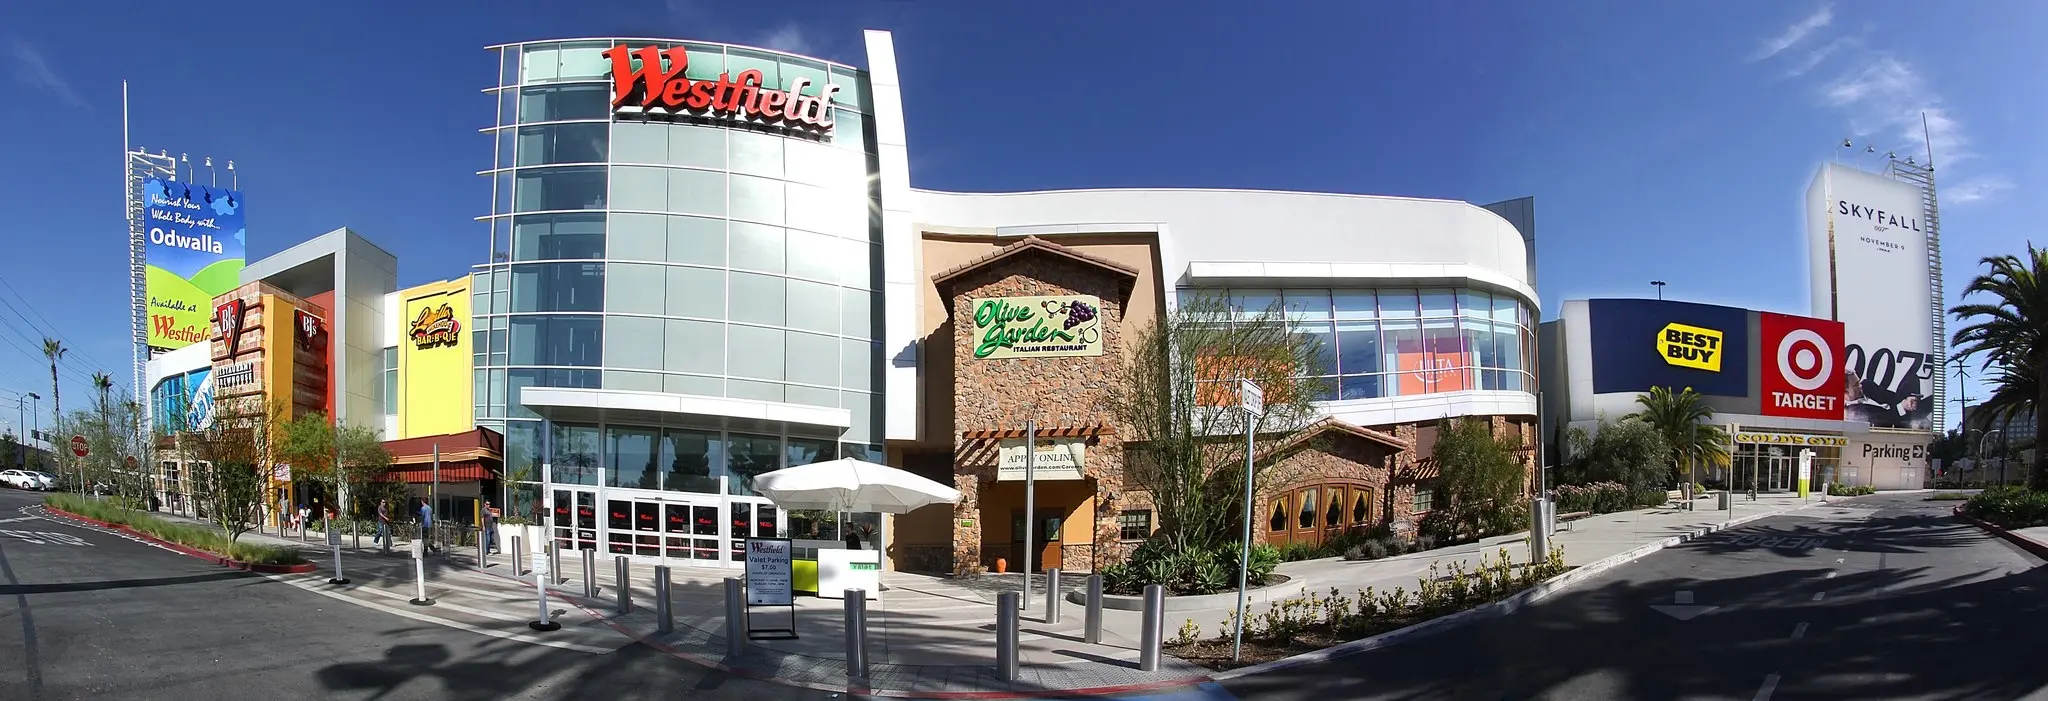 panoramic image of Westfield Culver City Mall